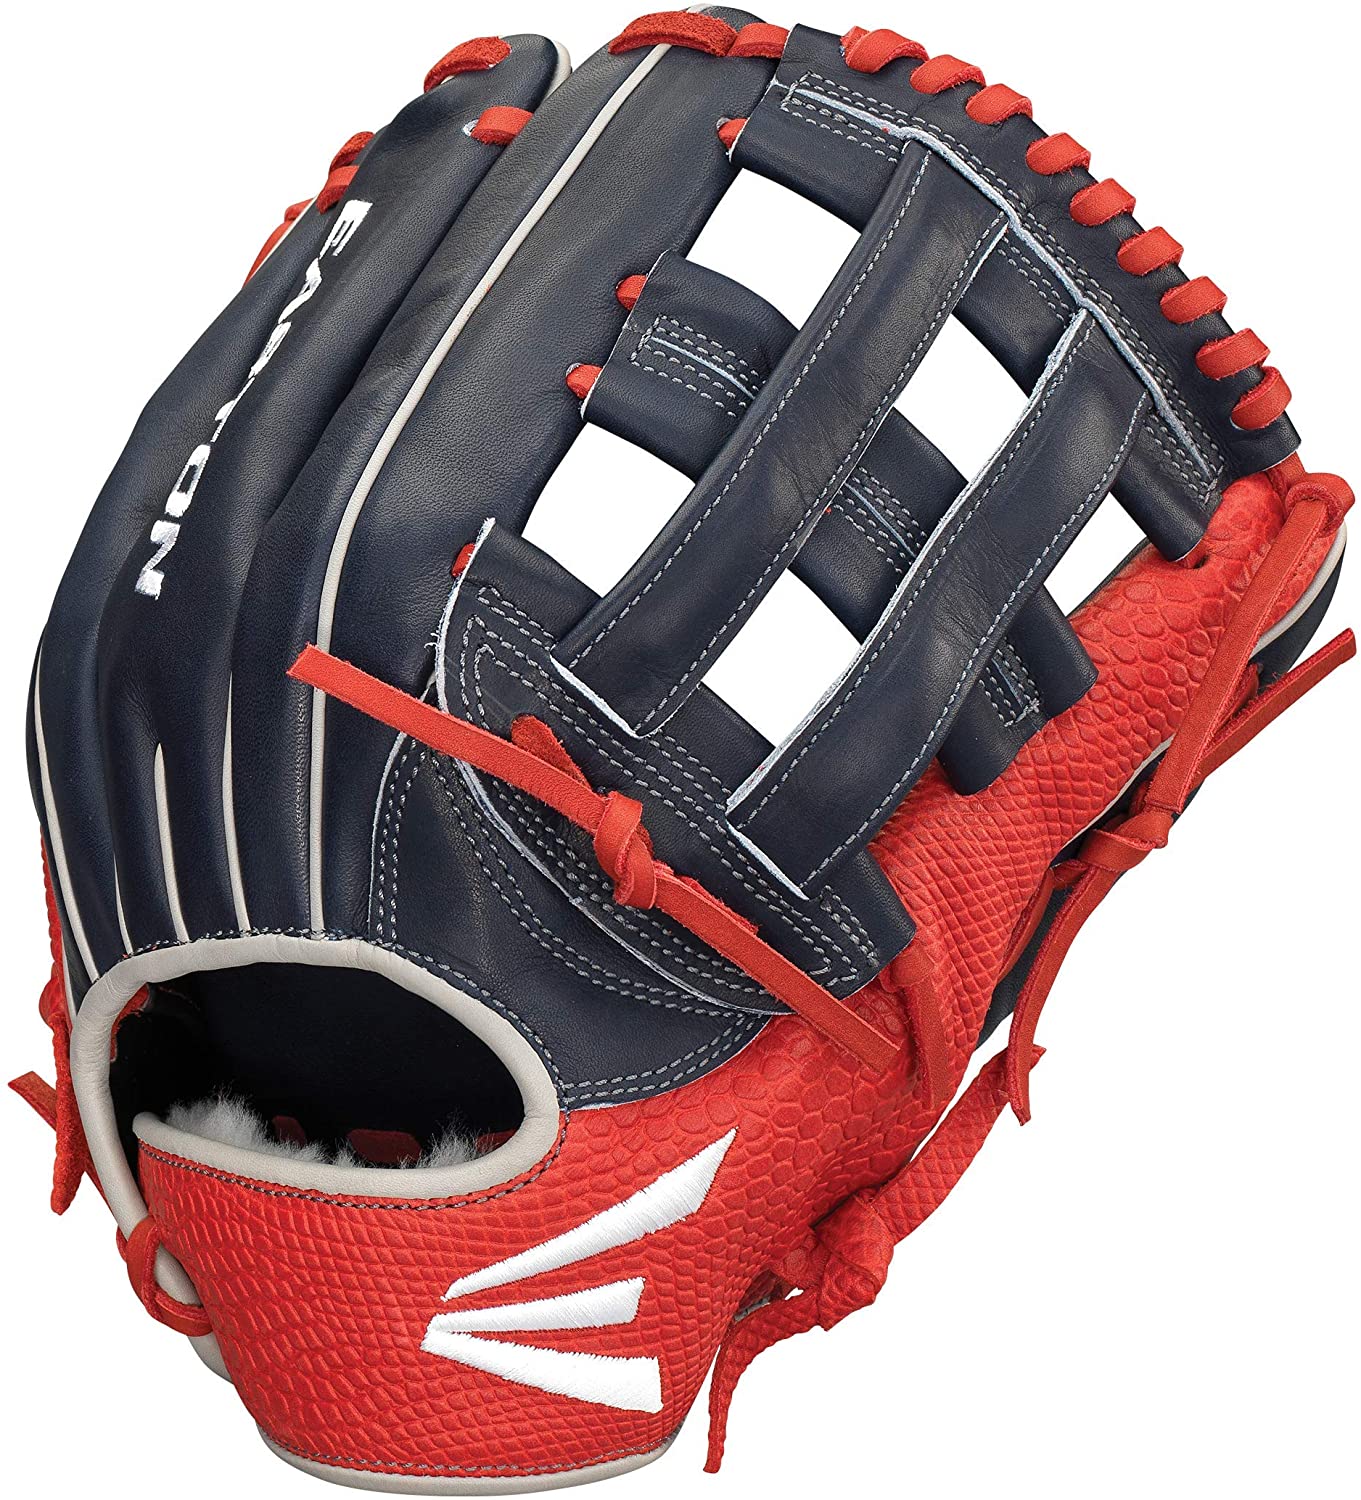 Step on to the field like a Pro with Easton’s all-new Professional Reserve Collection José Ramírez Game Spec ball glove. This exact on-field 12” H-web model, used by Cleveland infielder José Ramírez, is meticulously crafted with a Premium Reserve steer hide leather shell and palm lining. The padded wrapped thumb and pinky loops, and a luxurious sheep wool shearling fur wrist liner, provide players with best-in-class comfort and control. The José Ramírez Game Spec glove features a neutral pattern shape with medium pocket depth and pro grade rawhide laces.